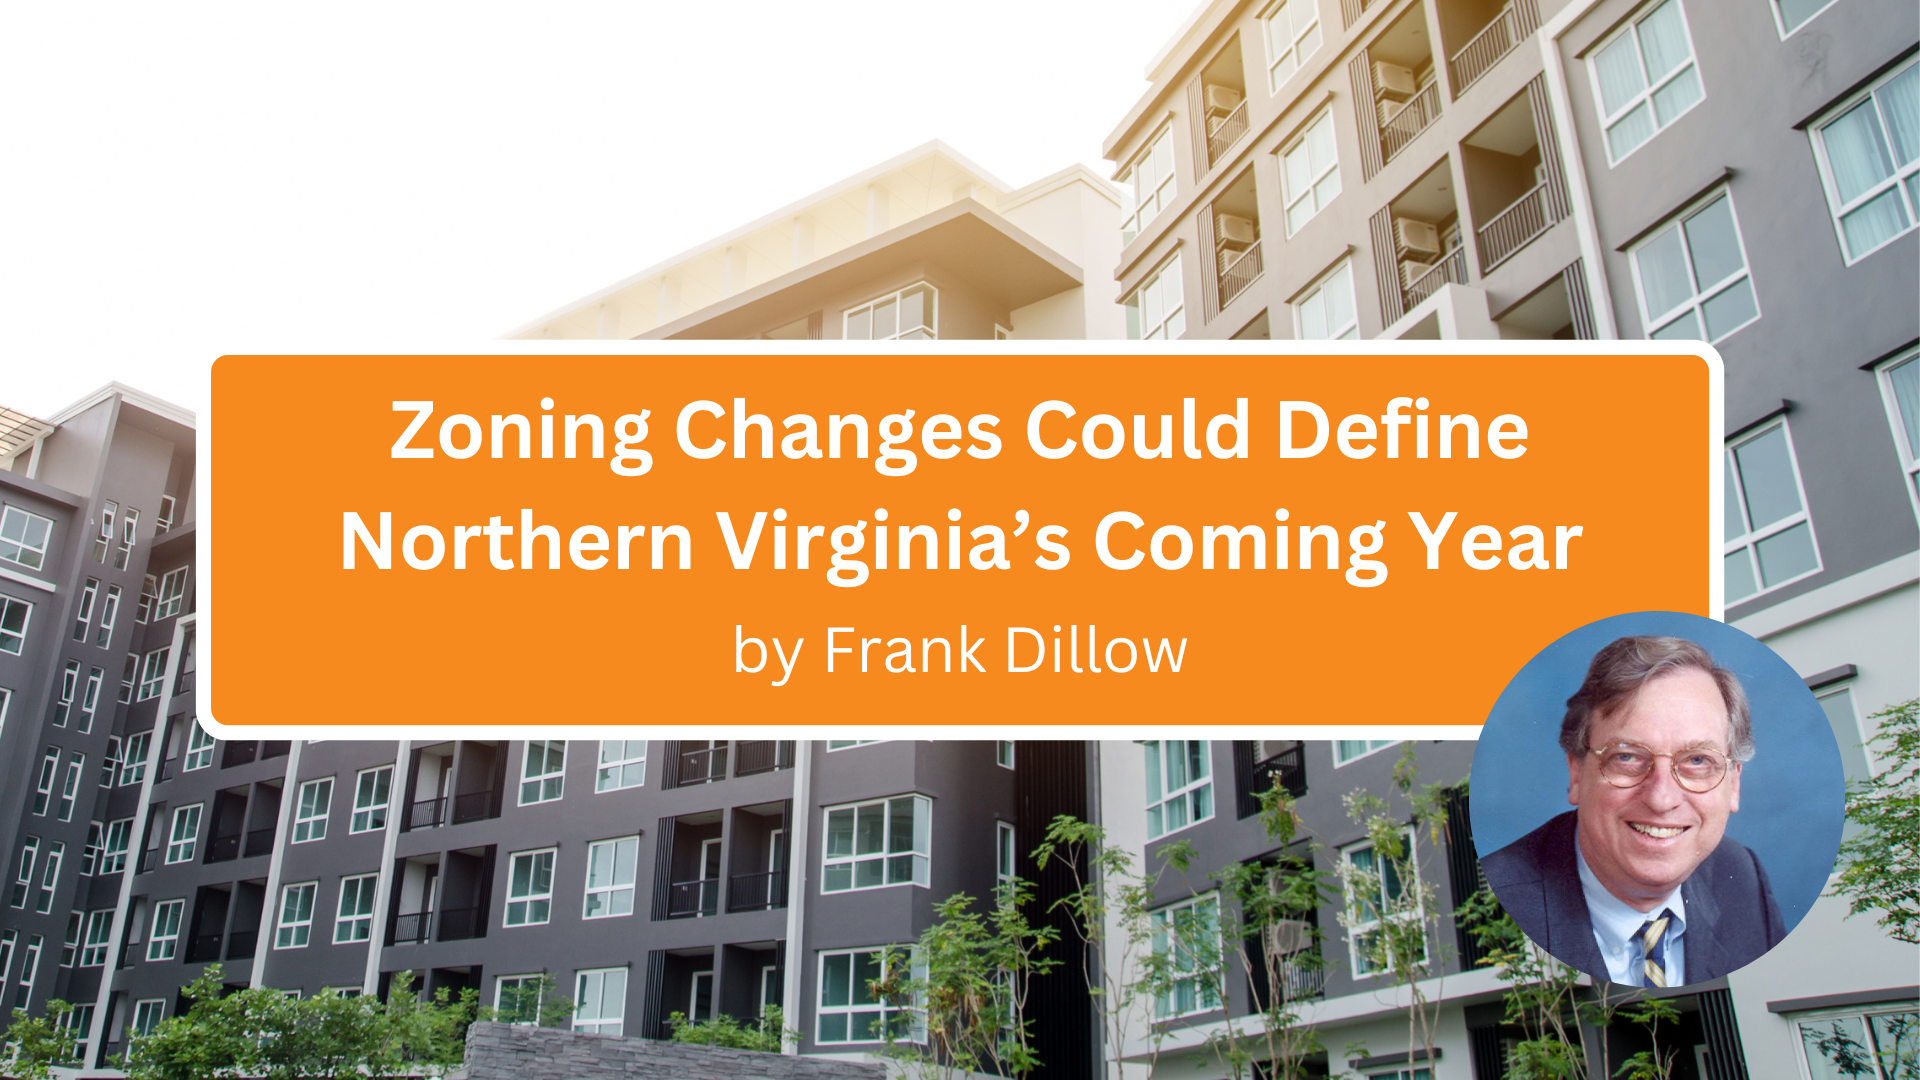 Zoning Changes Could Define Northern Virginia’s Coming Year